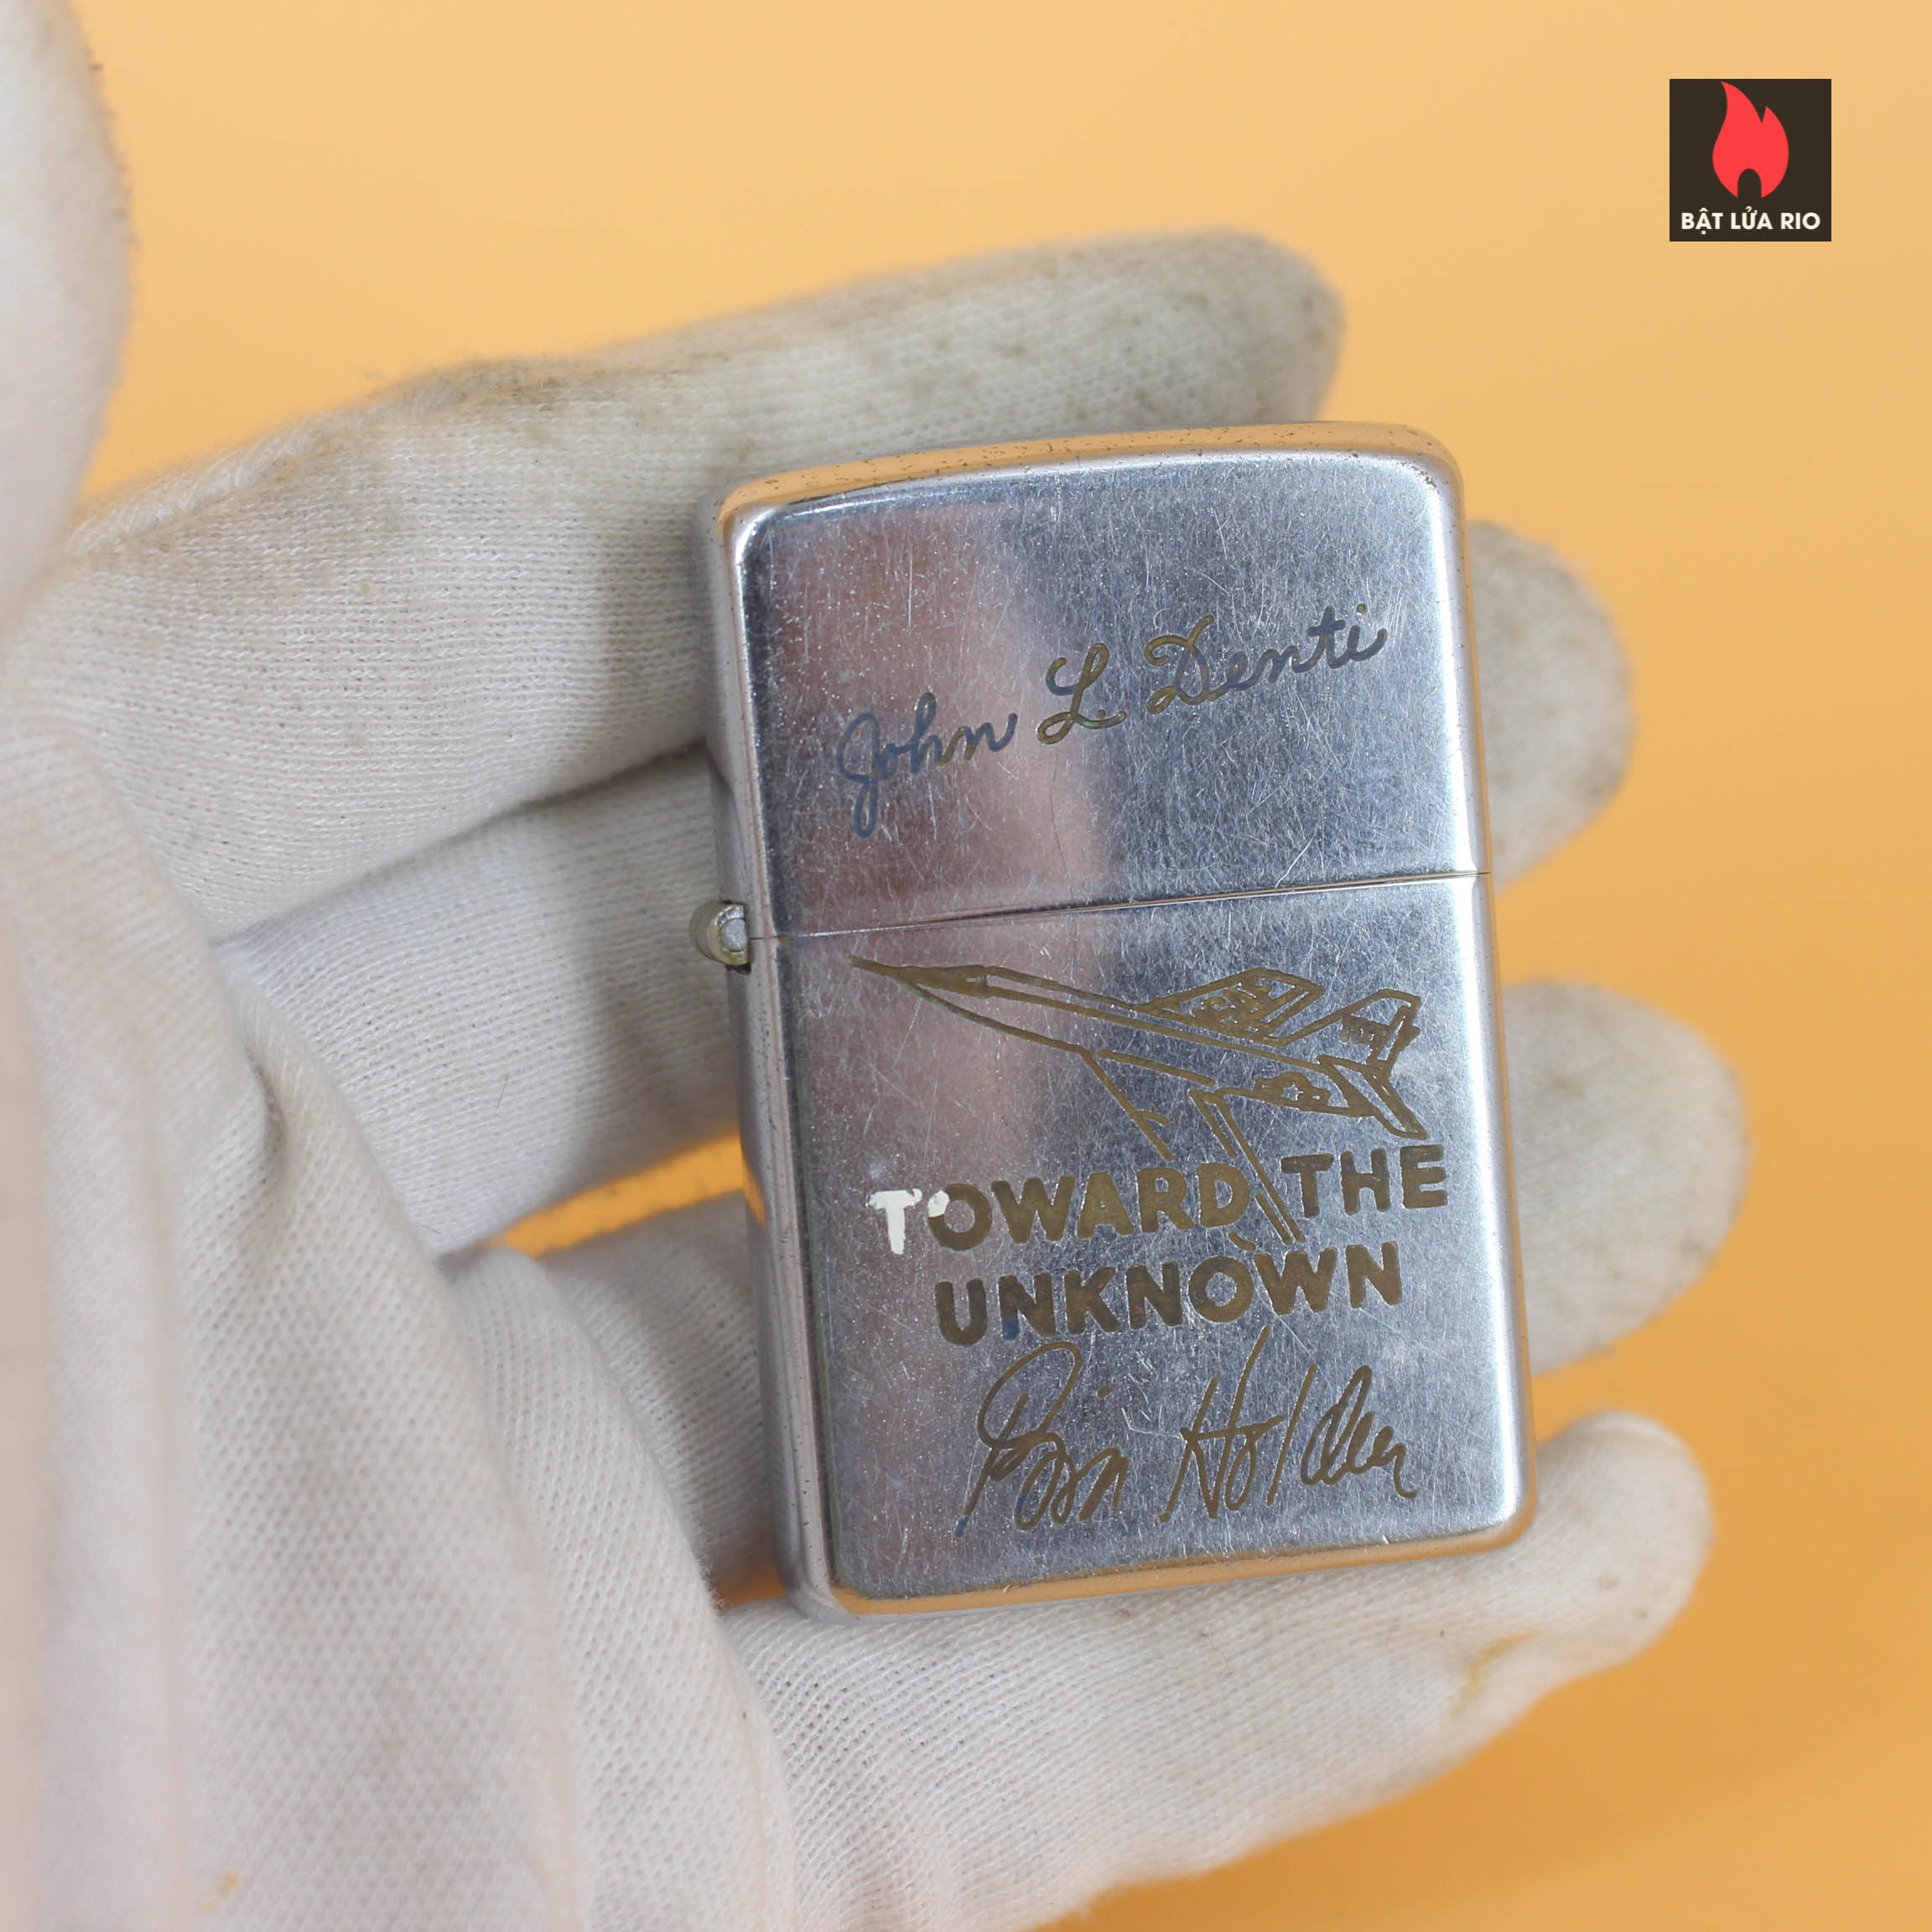 Zippo Xưa 1956 – Zippo lighter given to John L.Denti by Bill Holden - Star Of The Movie Toward the Unknown 4